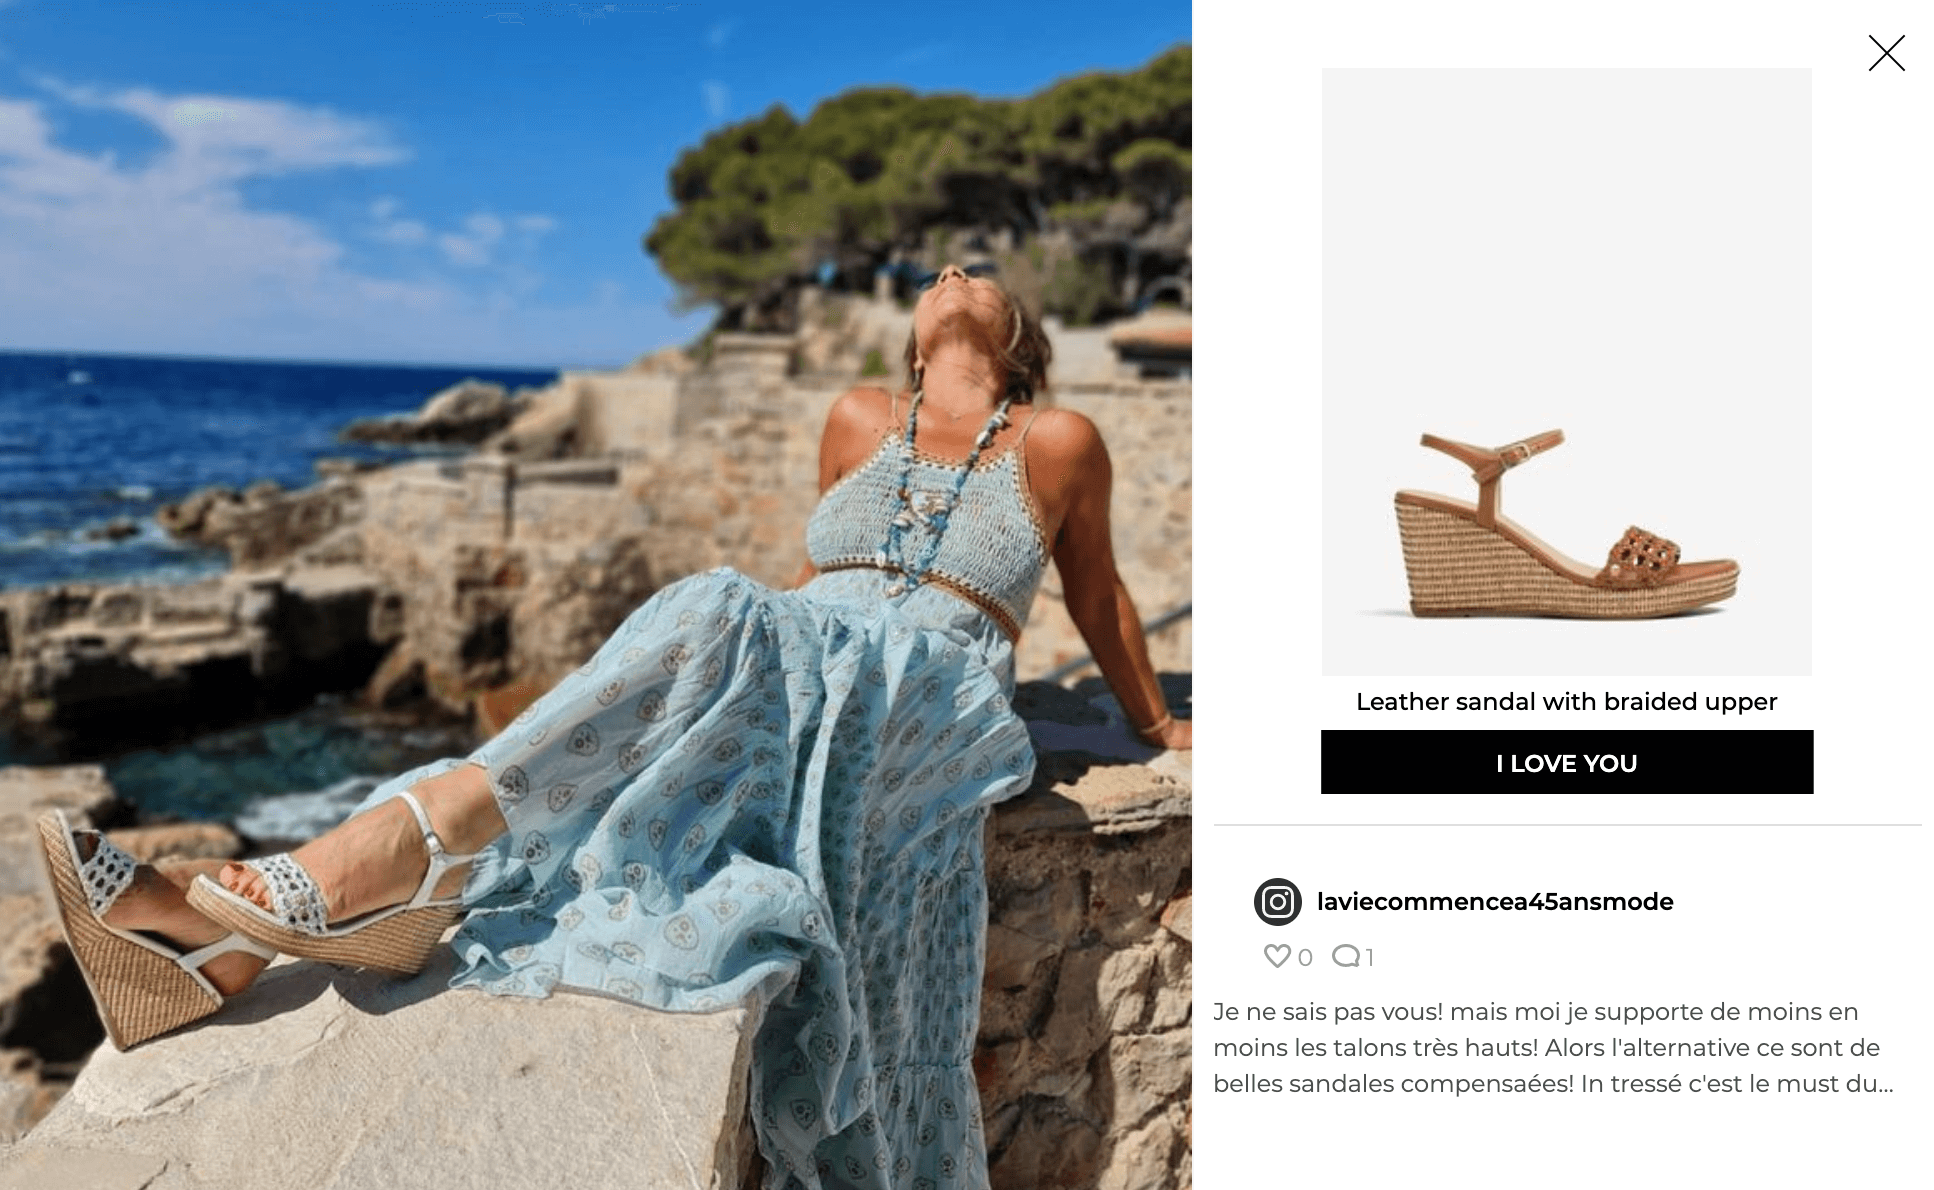 Woman Wearing Unisa Shoes and Blue Dress by The Sea